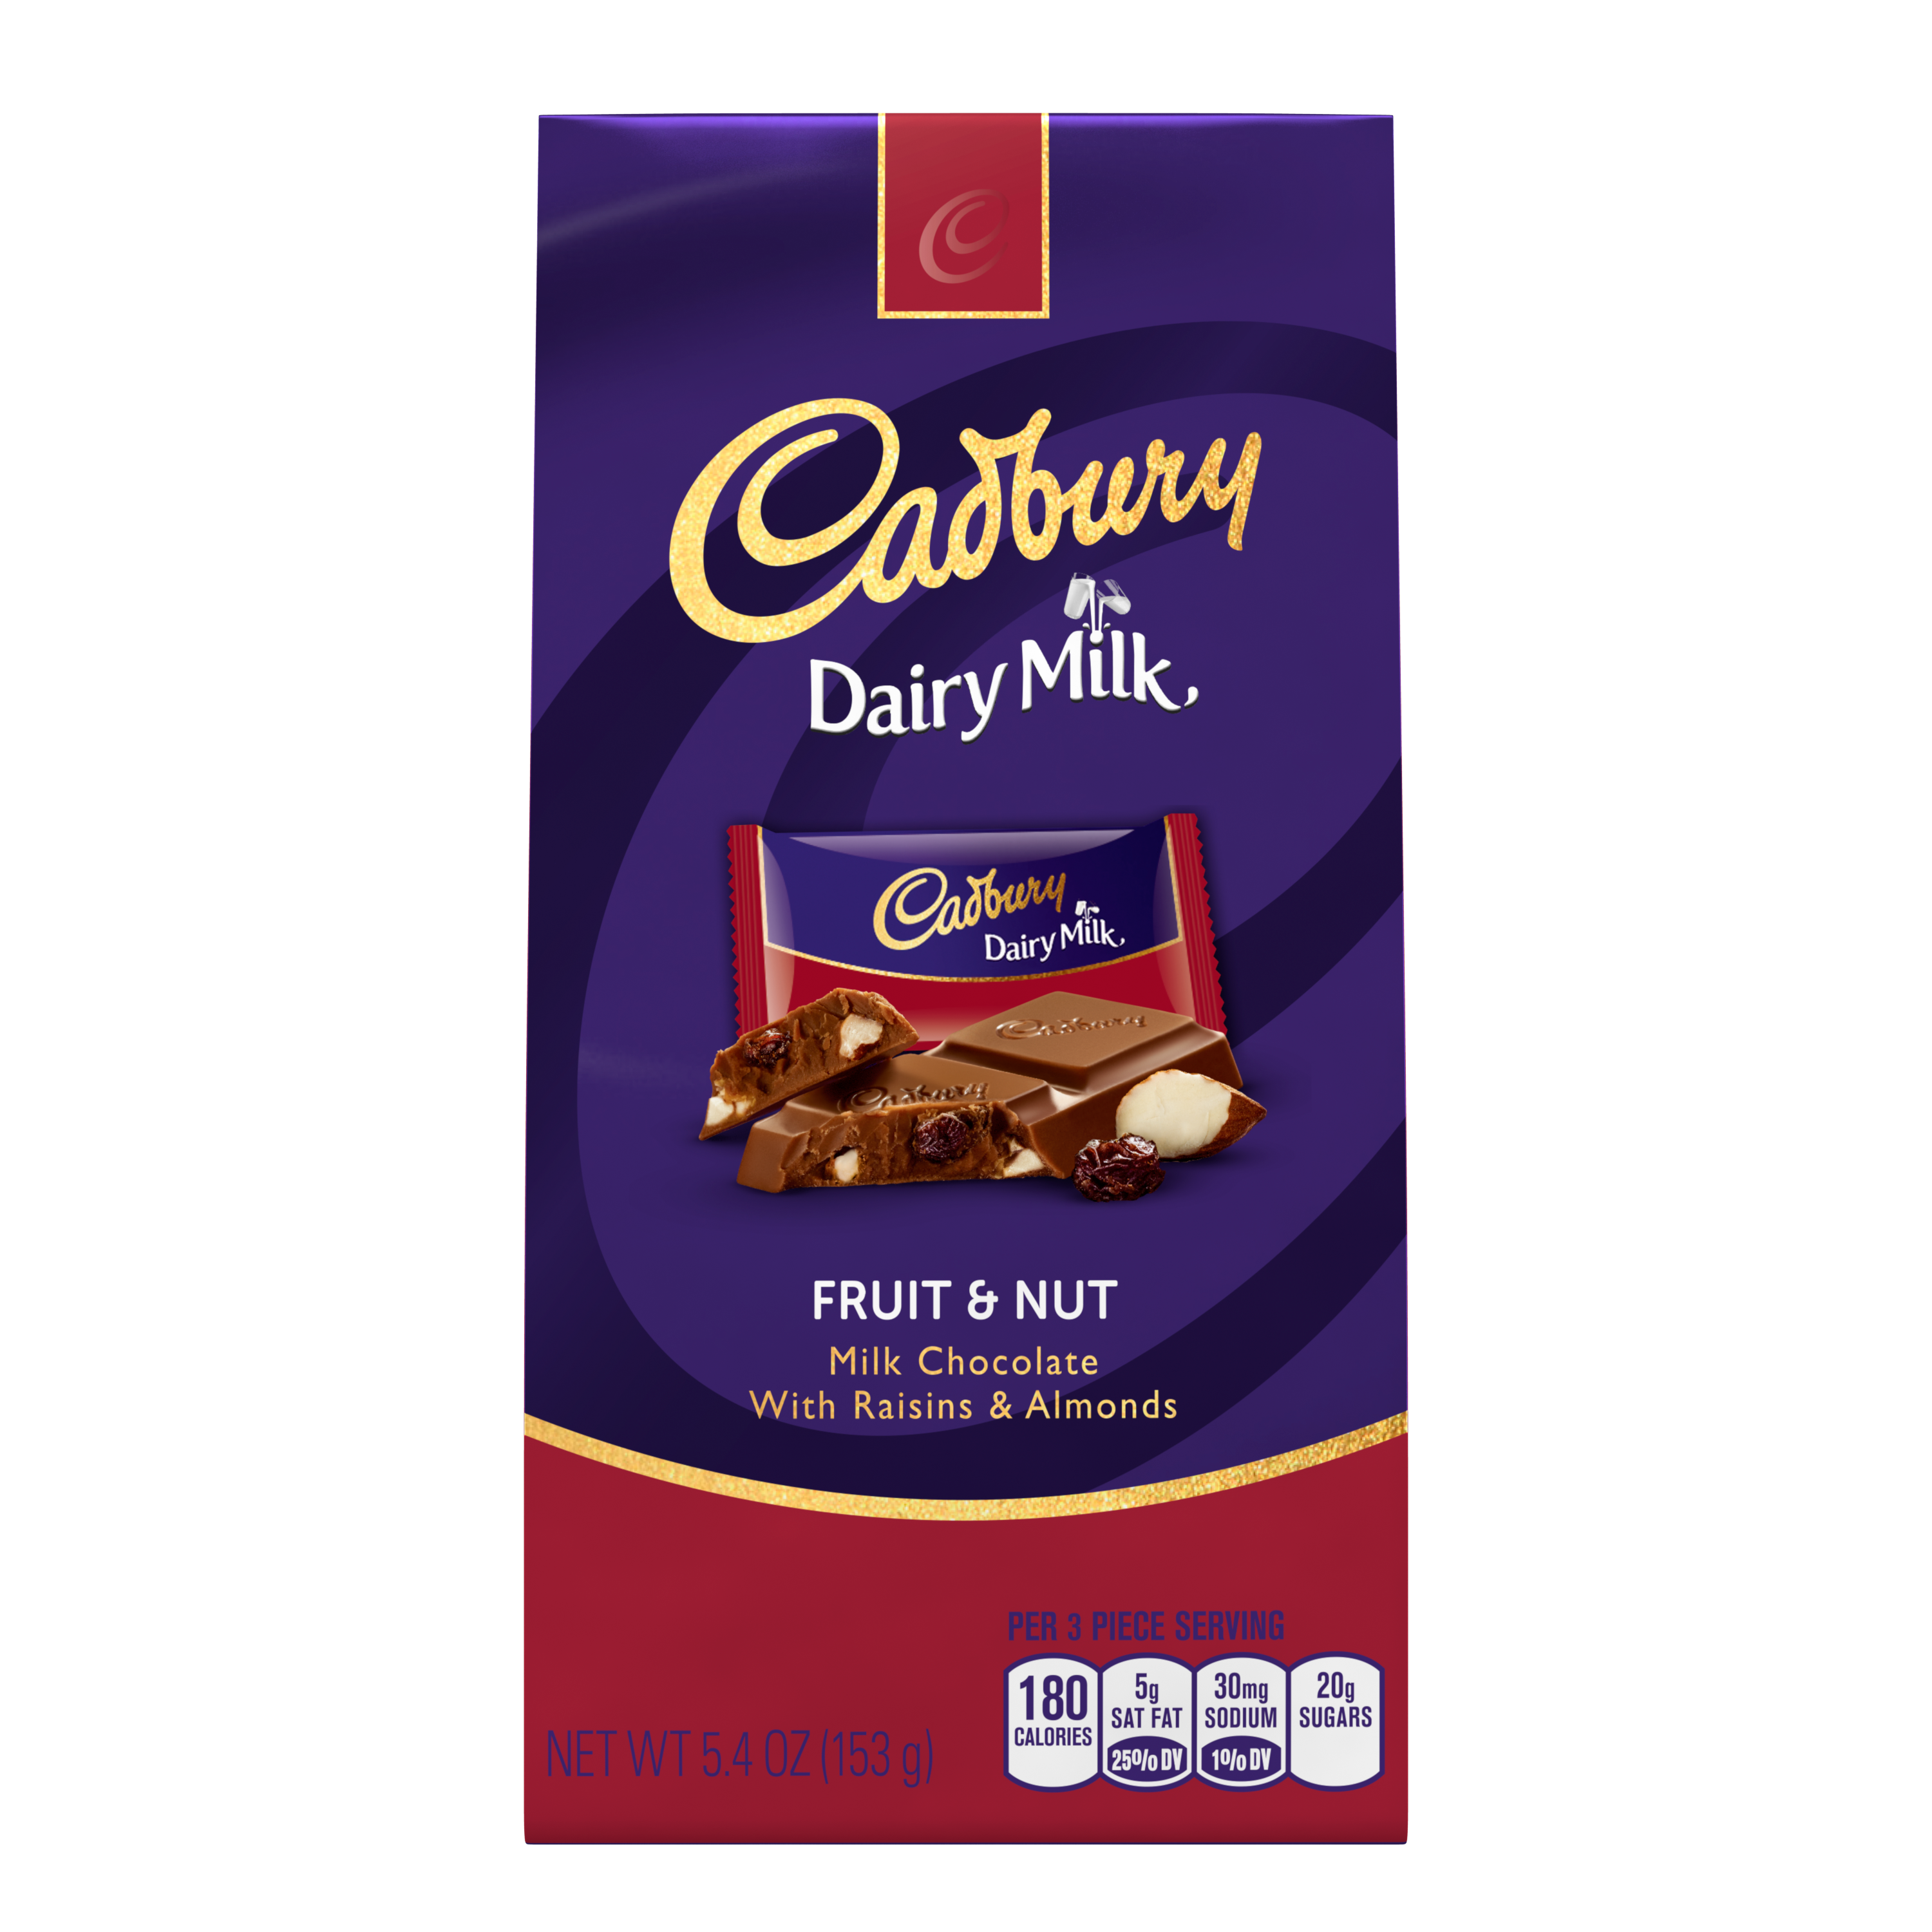 CADBURY DAIRY MILK Fruit & Nut Candy Bar, 5.4 oz - Front of Package